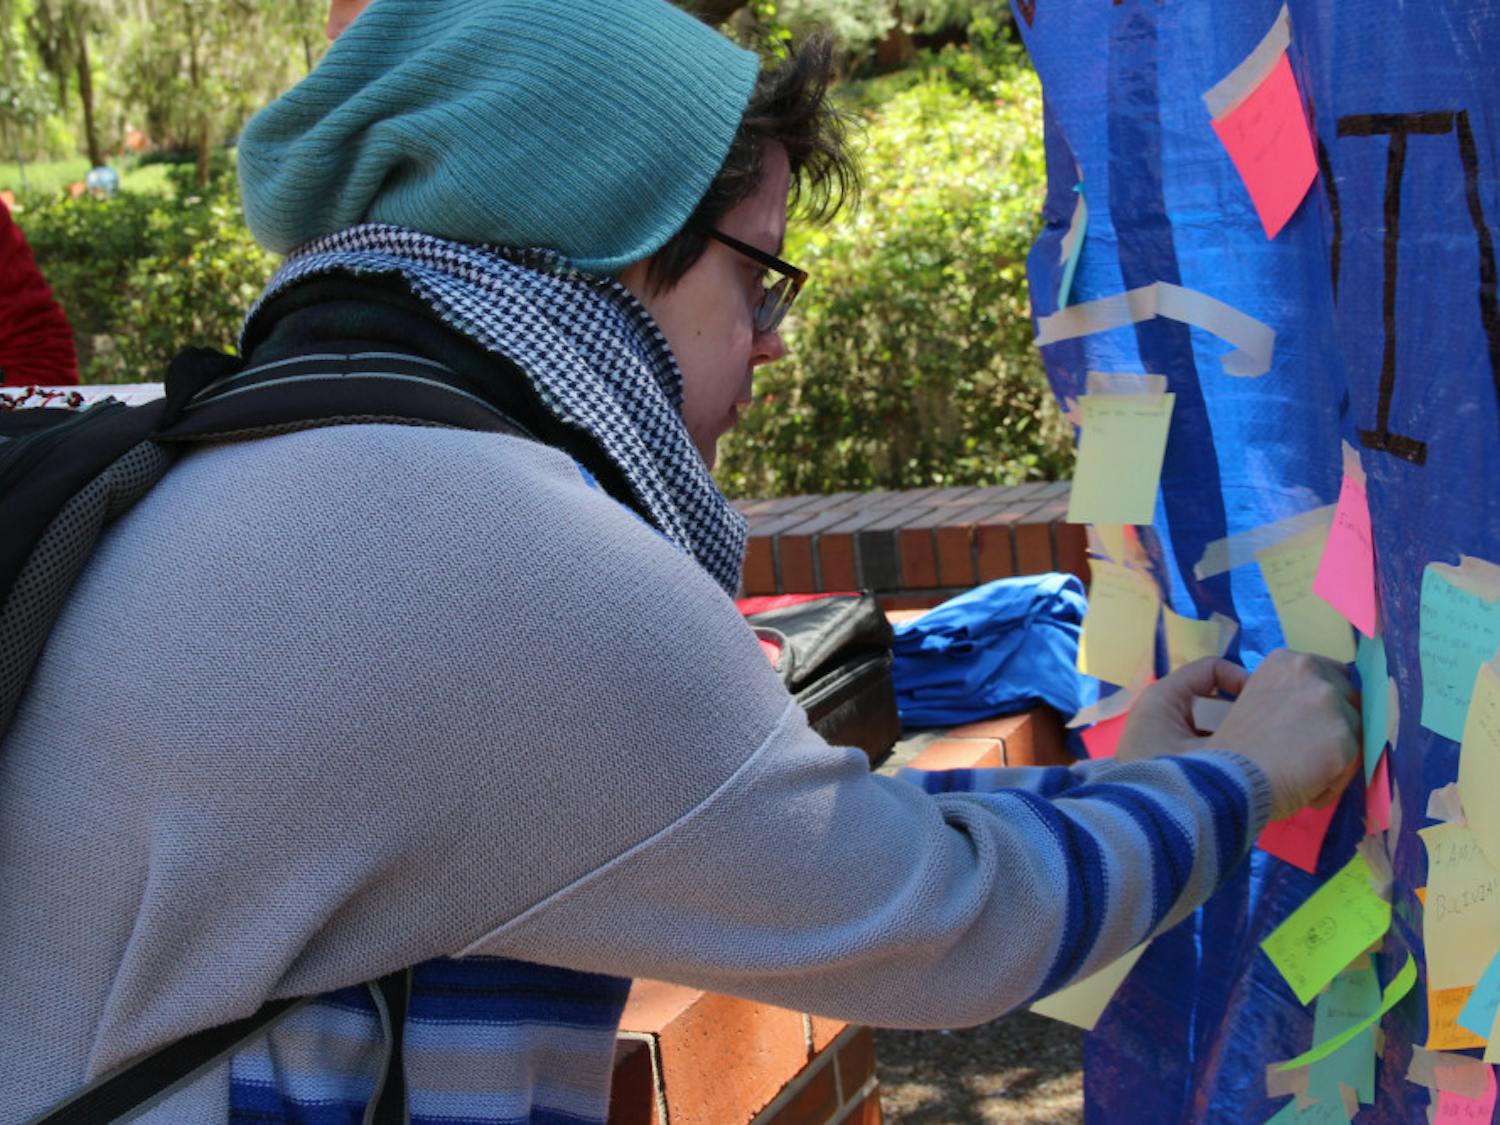 Teresa Sellos, a UF computer science fifth-year, tapes a Post-It note to a Student Government’s banner that reads “What makes you diverse?” on Monday on Turlington Plaza. The banner is part of a weeklong series of events hosted by Student Government called Diversity Week.